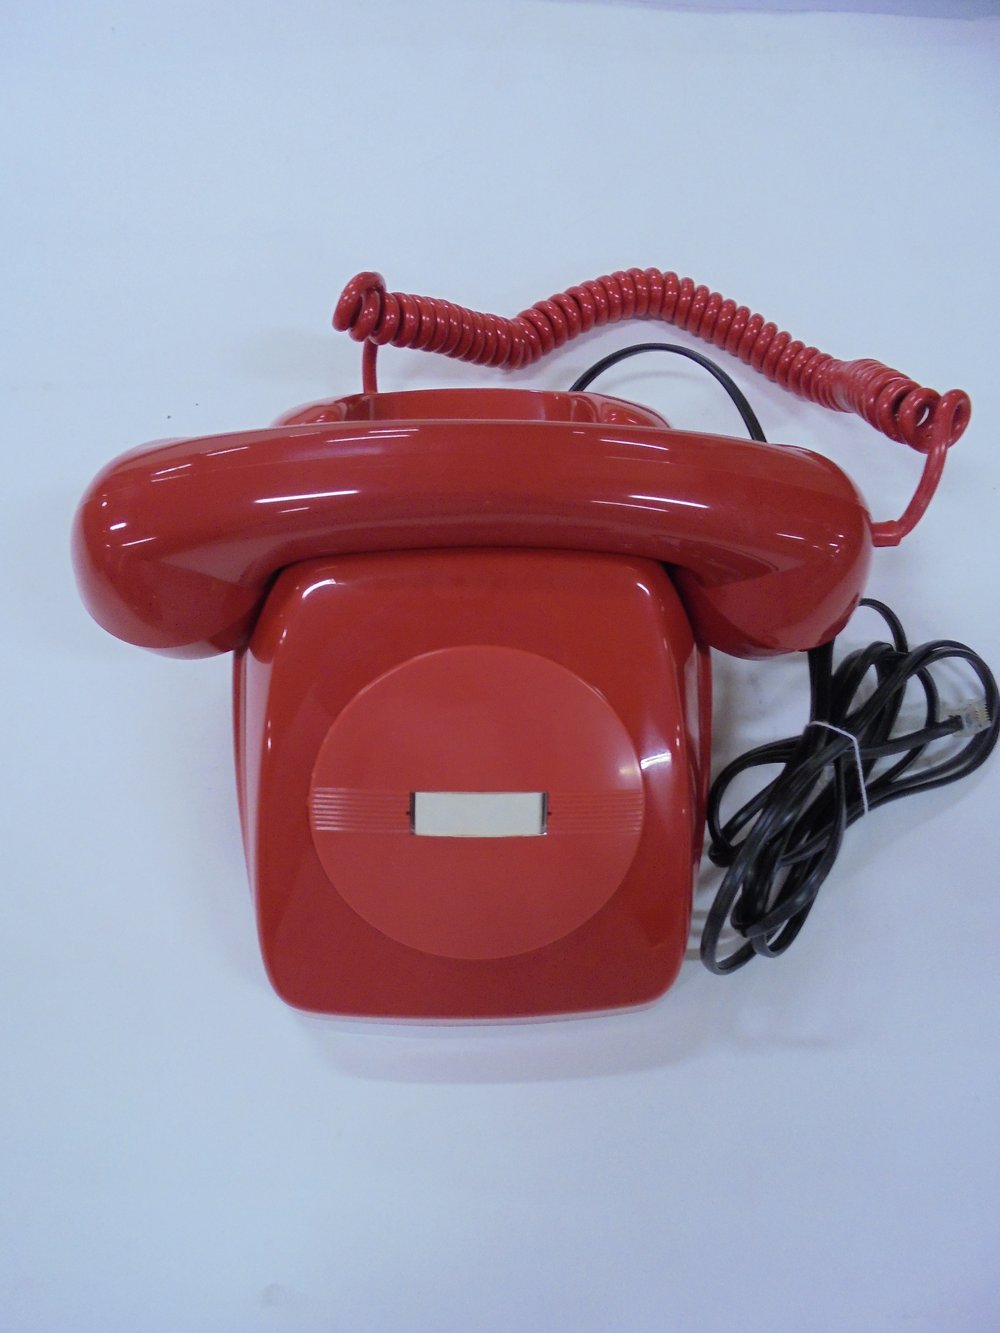 Heraldo direct line telephone. The ringing is internal, consisting of two rings, one inserted inside the other. Telefónica began marketing the Heraldo model in 1963 and developed different models throughout its history. It became a popular model that was produced in different colours. It replaced the famous black Bakelite telephone installed until then by the company.